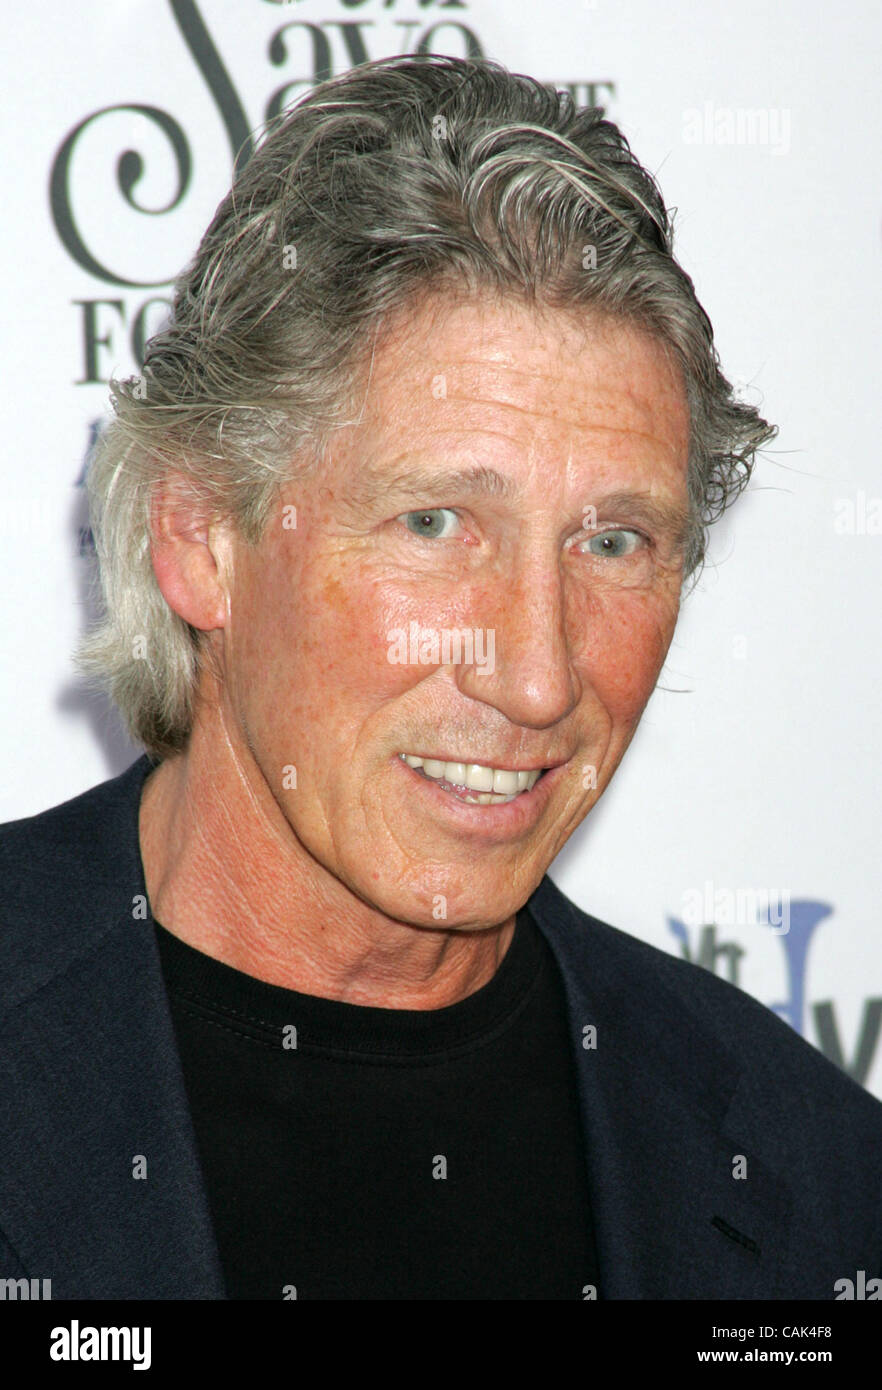 Sep 20, 2007 - New York, NY, USA - Singer ROGER WATERS at the arrivals for the VH1 Save The Music Foundation's 10th Anniversary Gala held at Lincoln Center. (Credit Image: © Nancy Kaszerman/ZUMA Press) Stock Photo